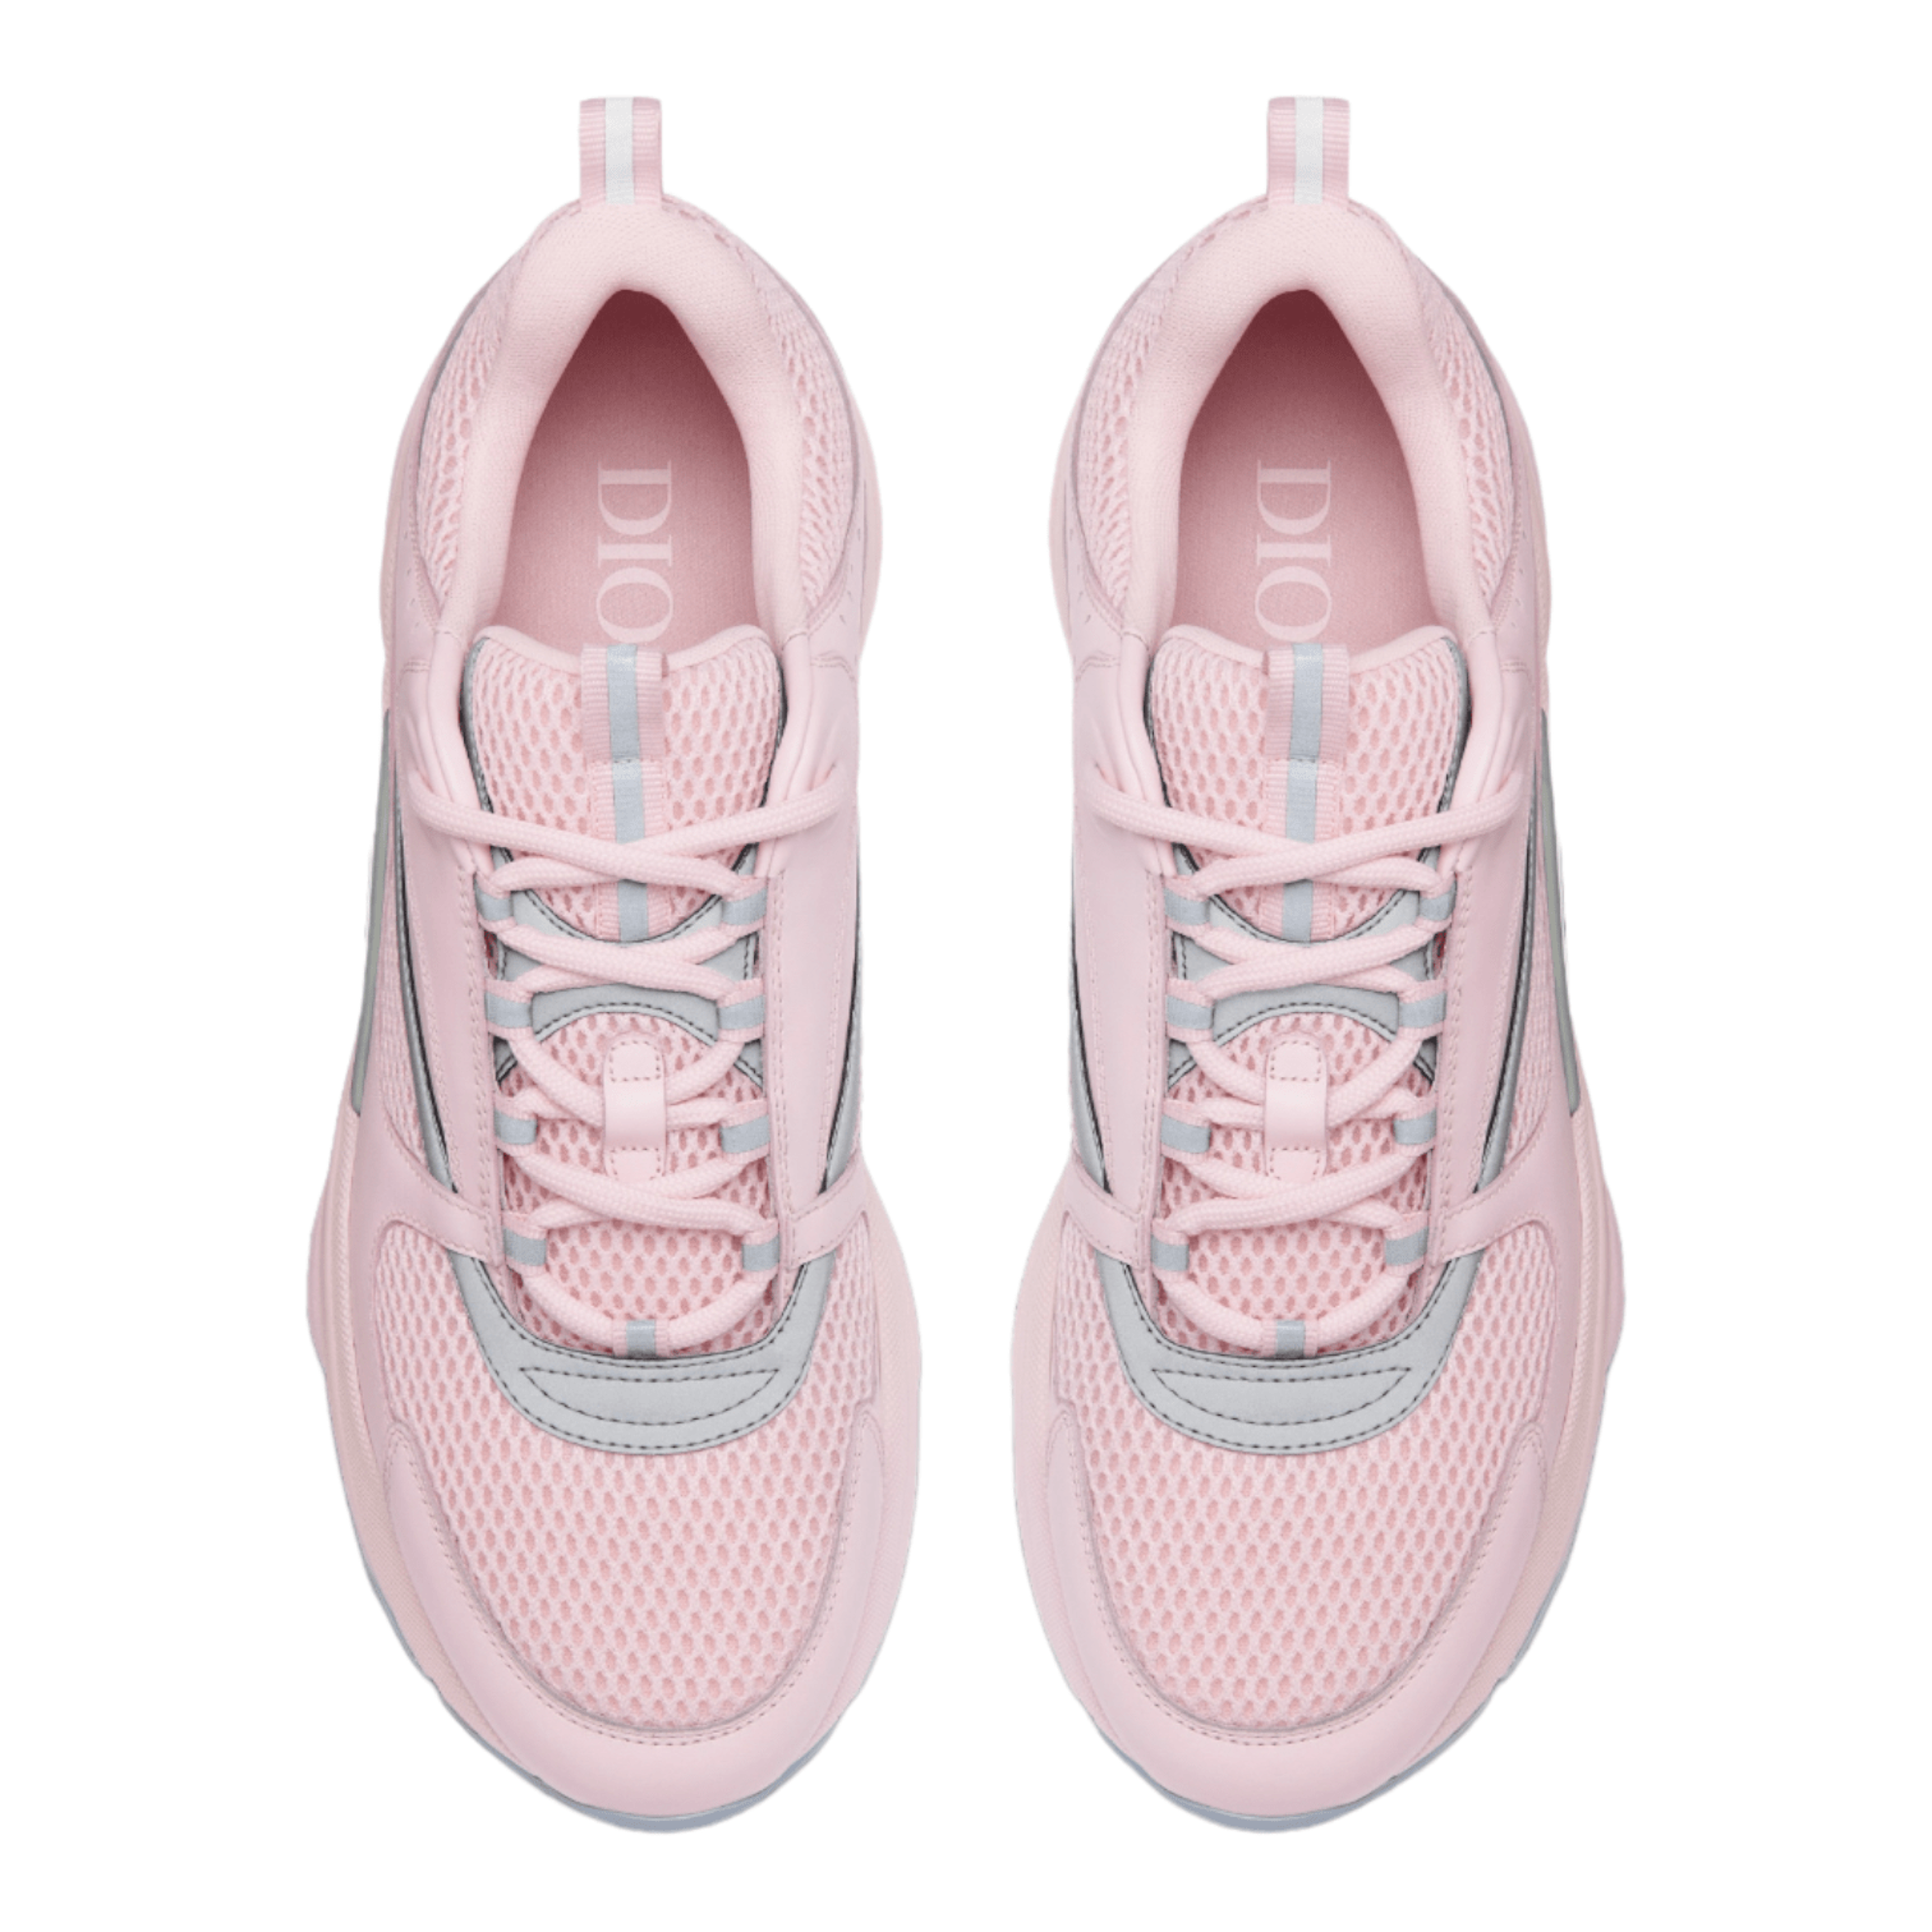 Alternate View 3 of Dior B22 Trainer Pink Silver